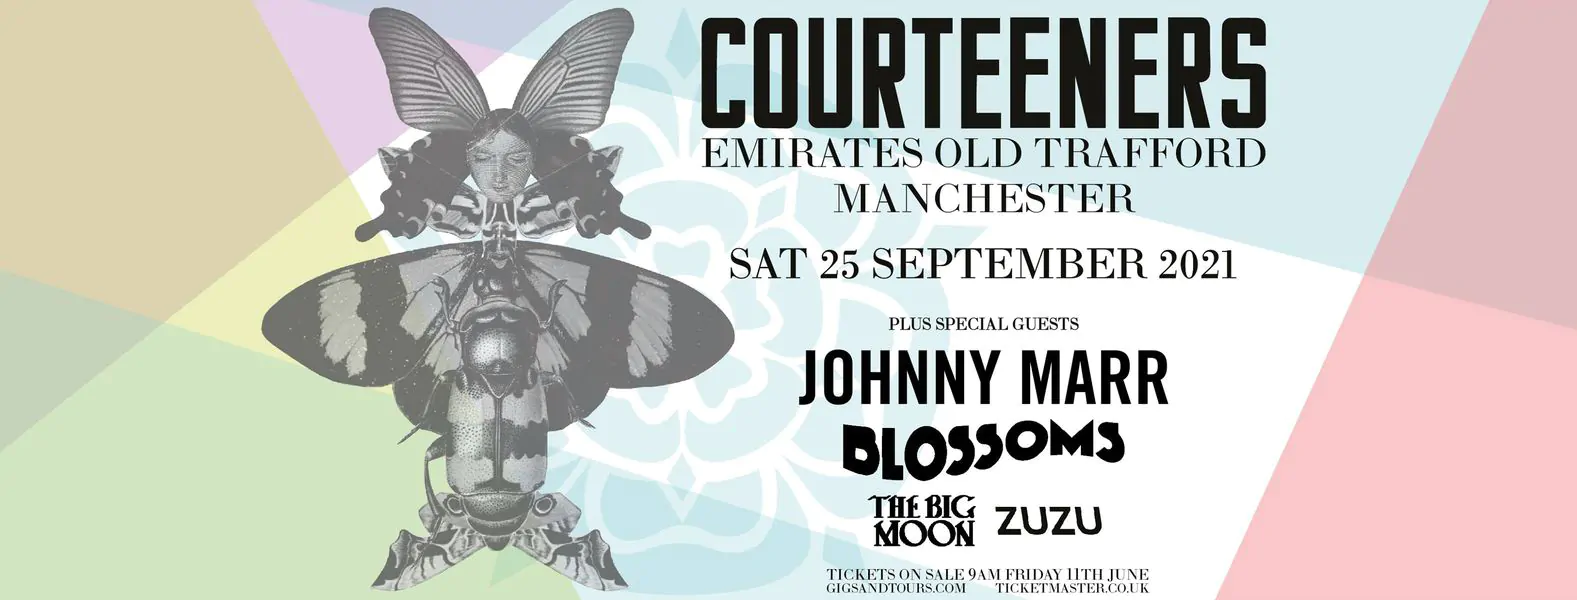 COURTEENERS announce headline show at Emirates Old Trafford, Manchester – Saturday 25th September 2021